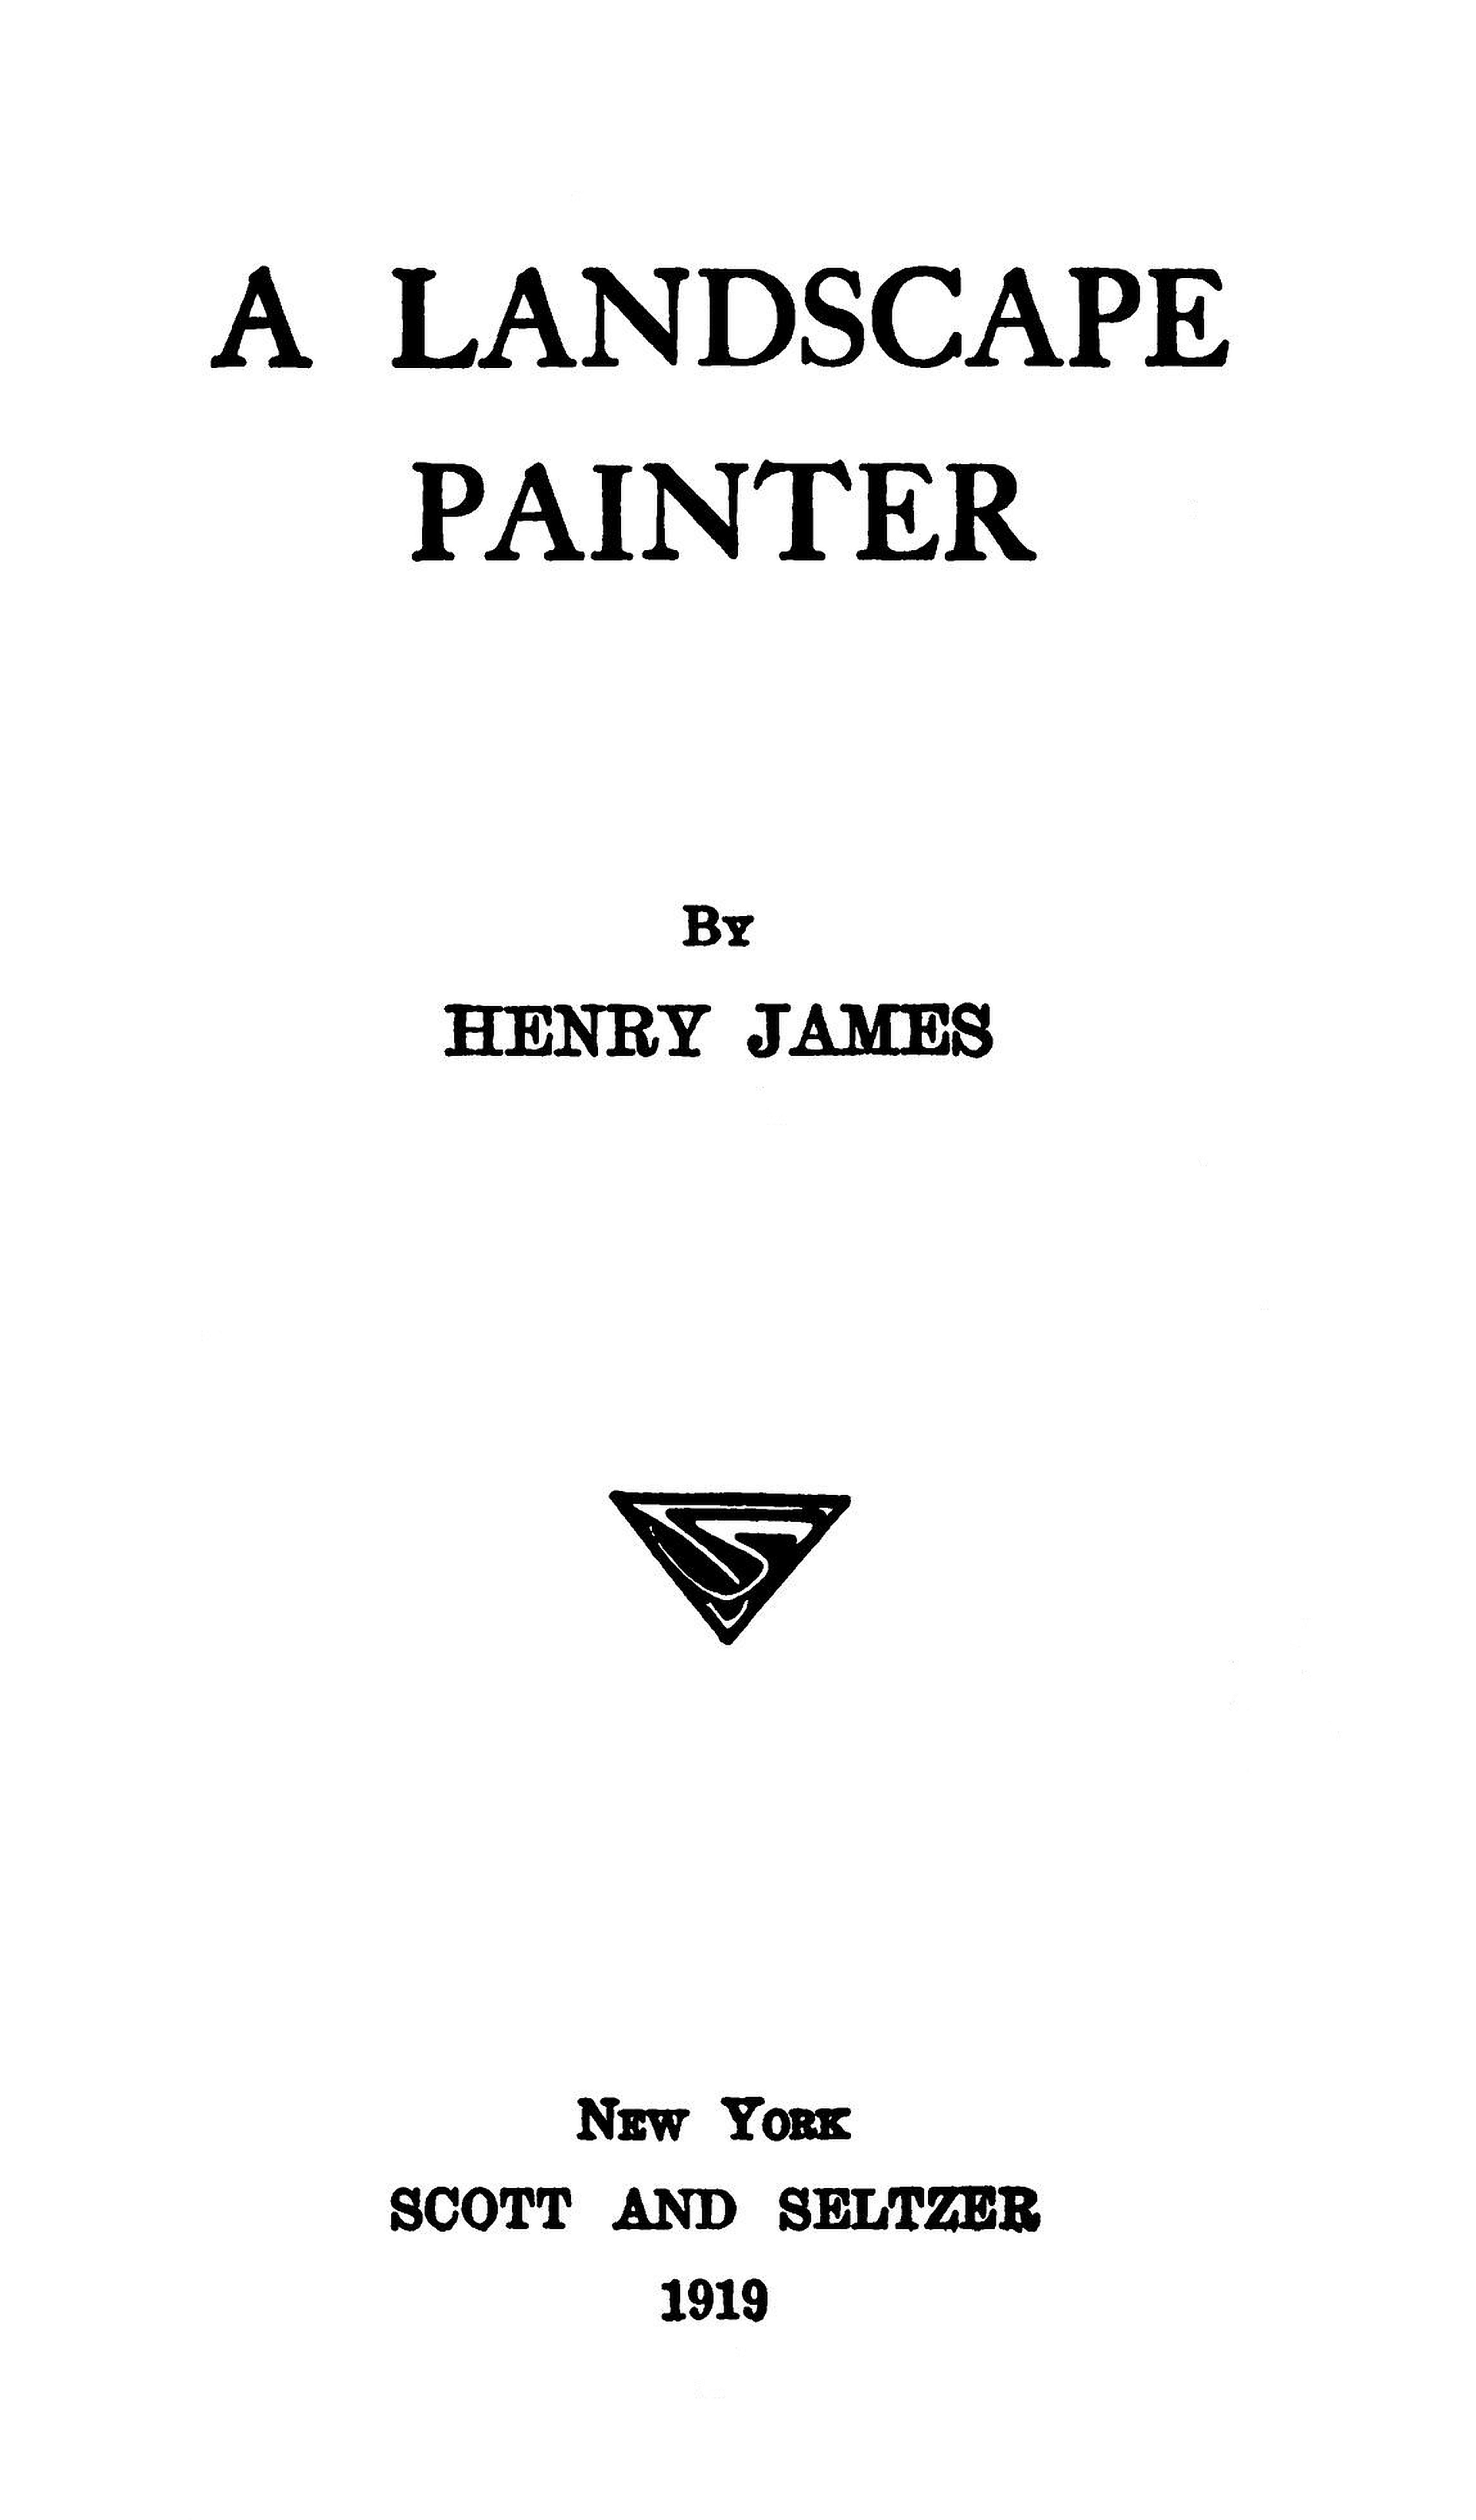 The Project Gutenberg eBook of The Landscape Painter, by Henry James.